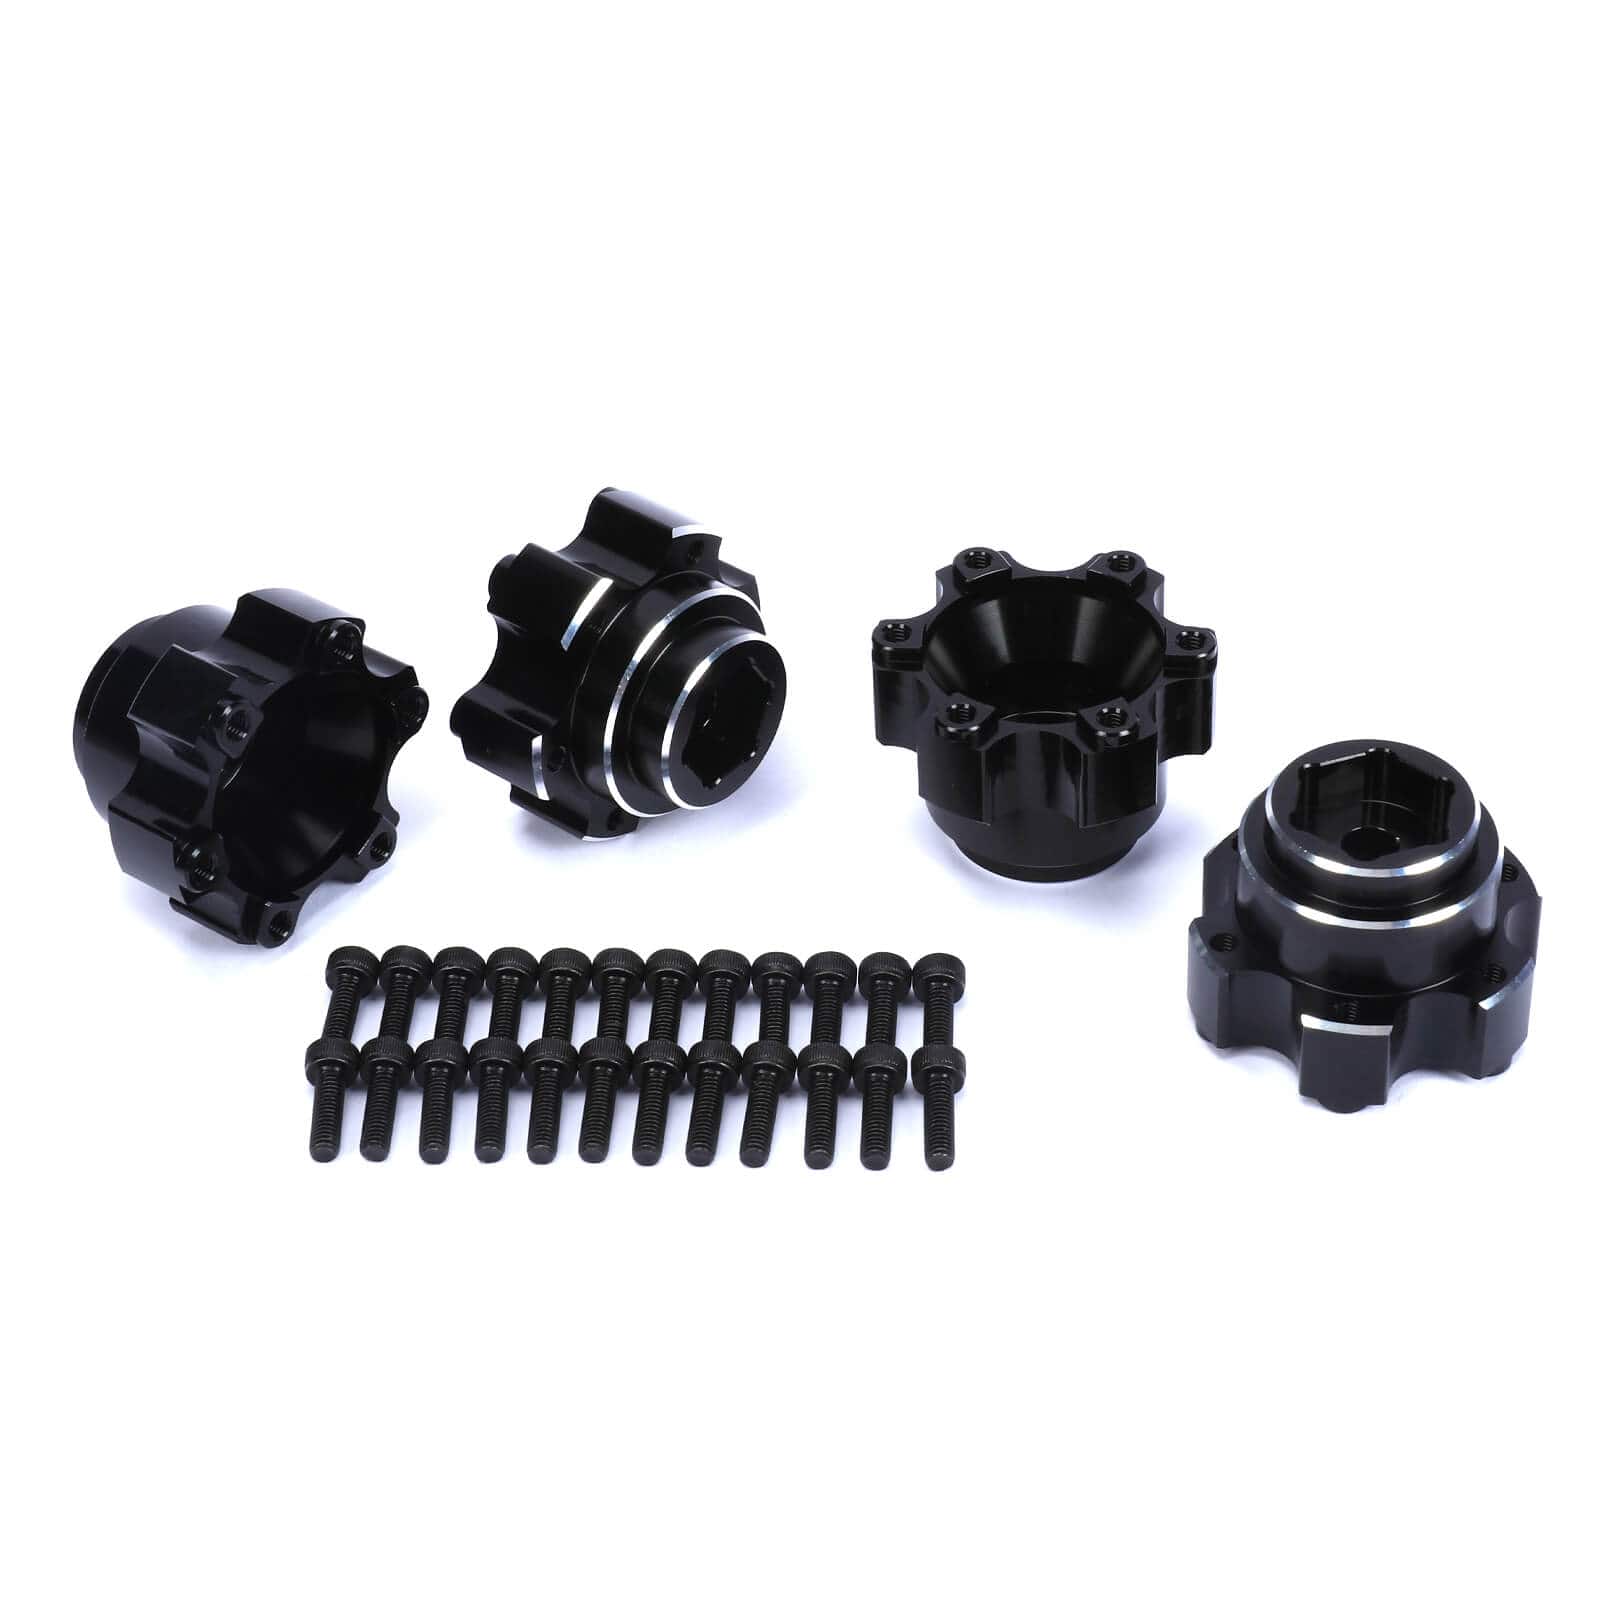 RCAWD UNIHEX UNIHEX 1/10 6x30 to 14mm Aluminum Hex Adapters for Pro-line 6x30 Removable Hex Wheels Black